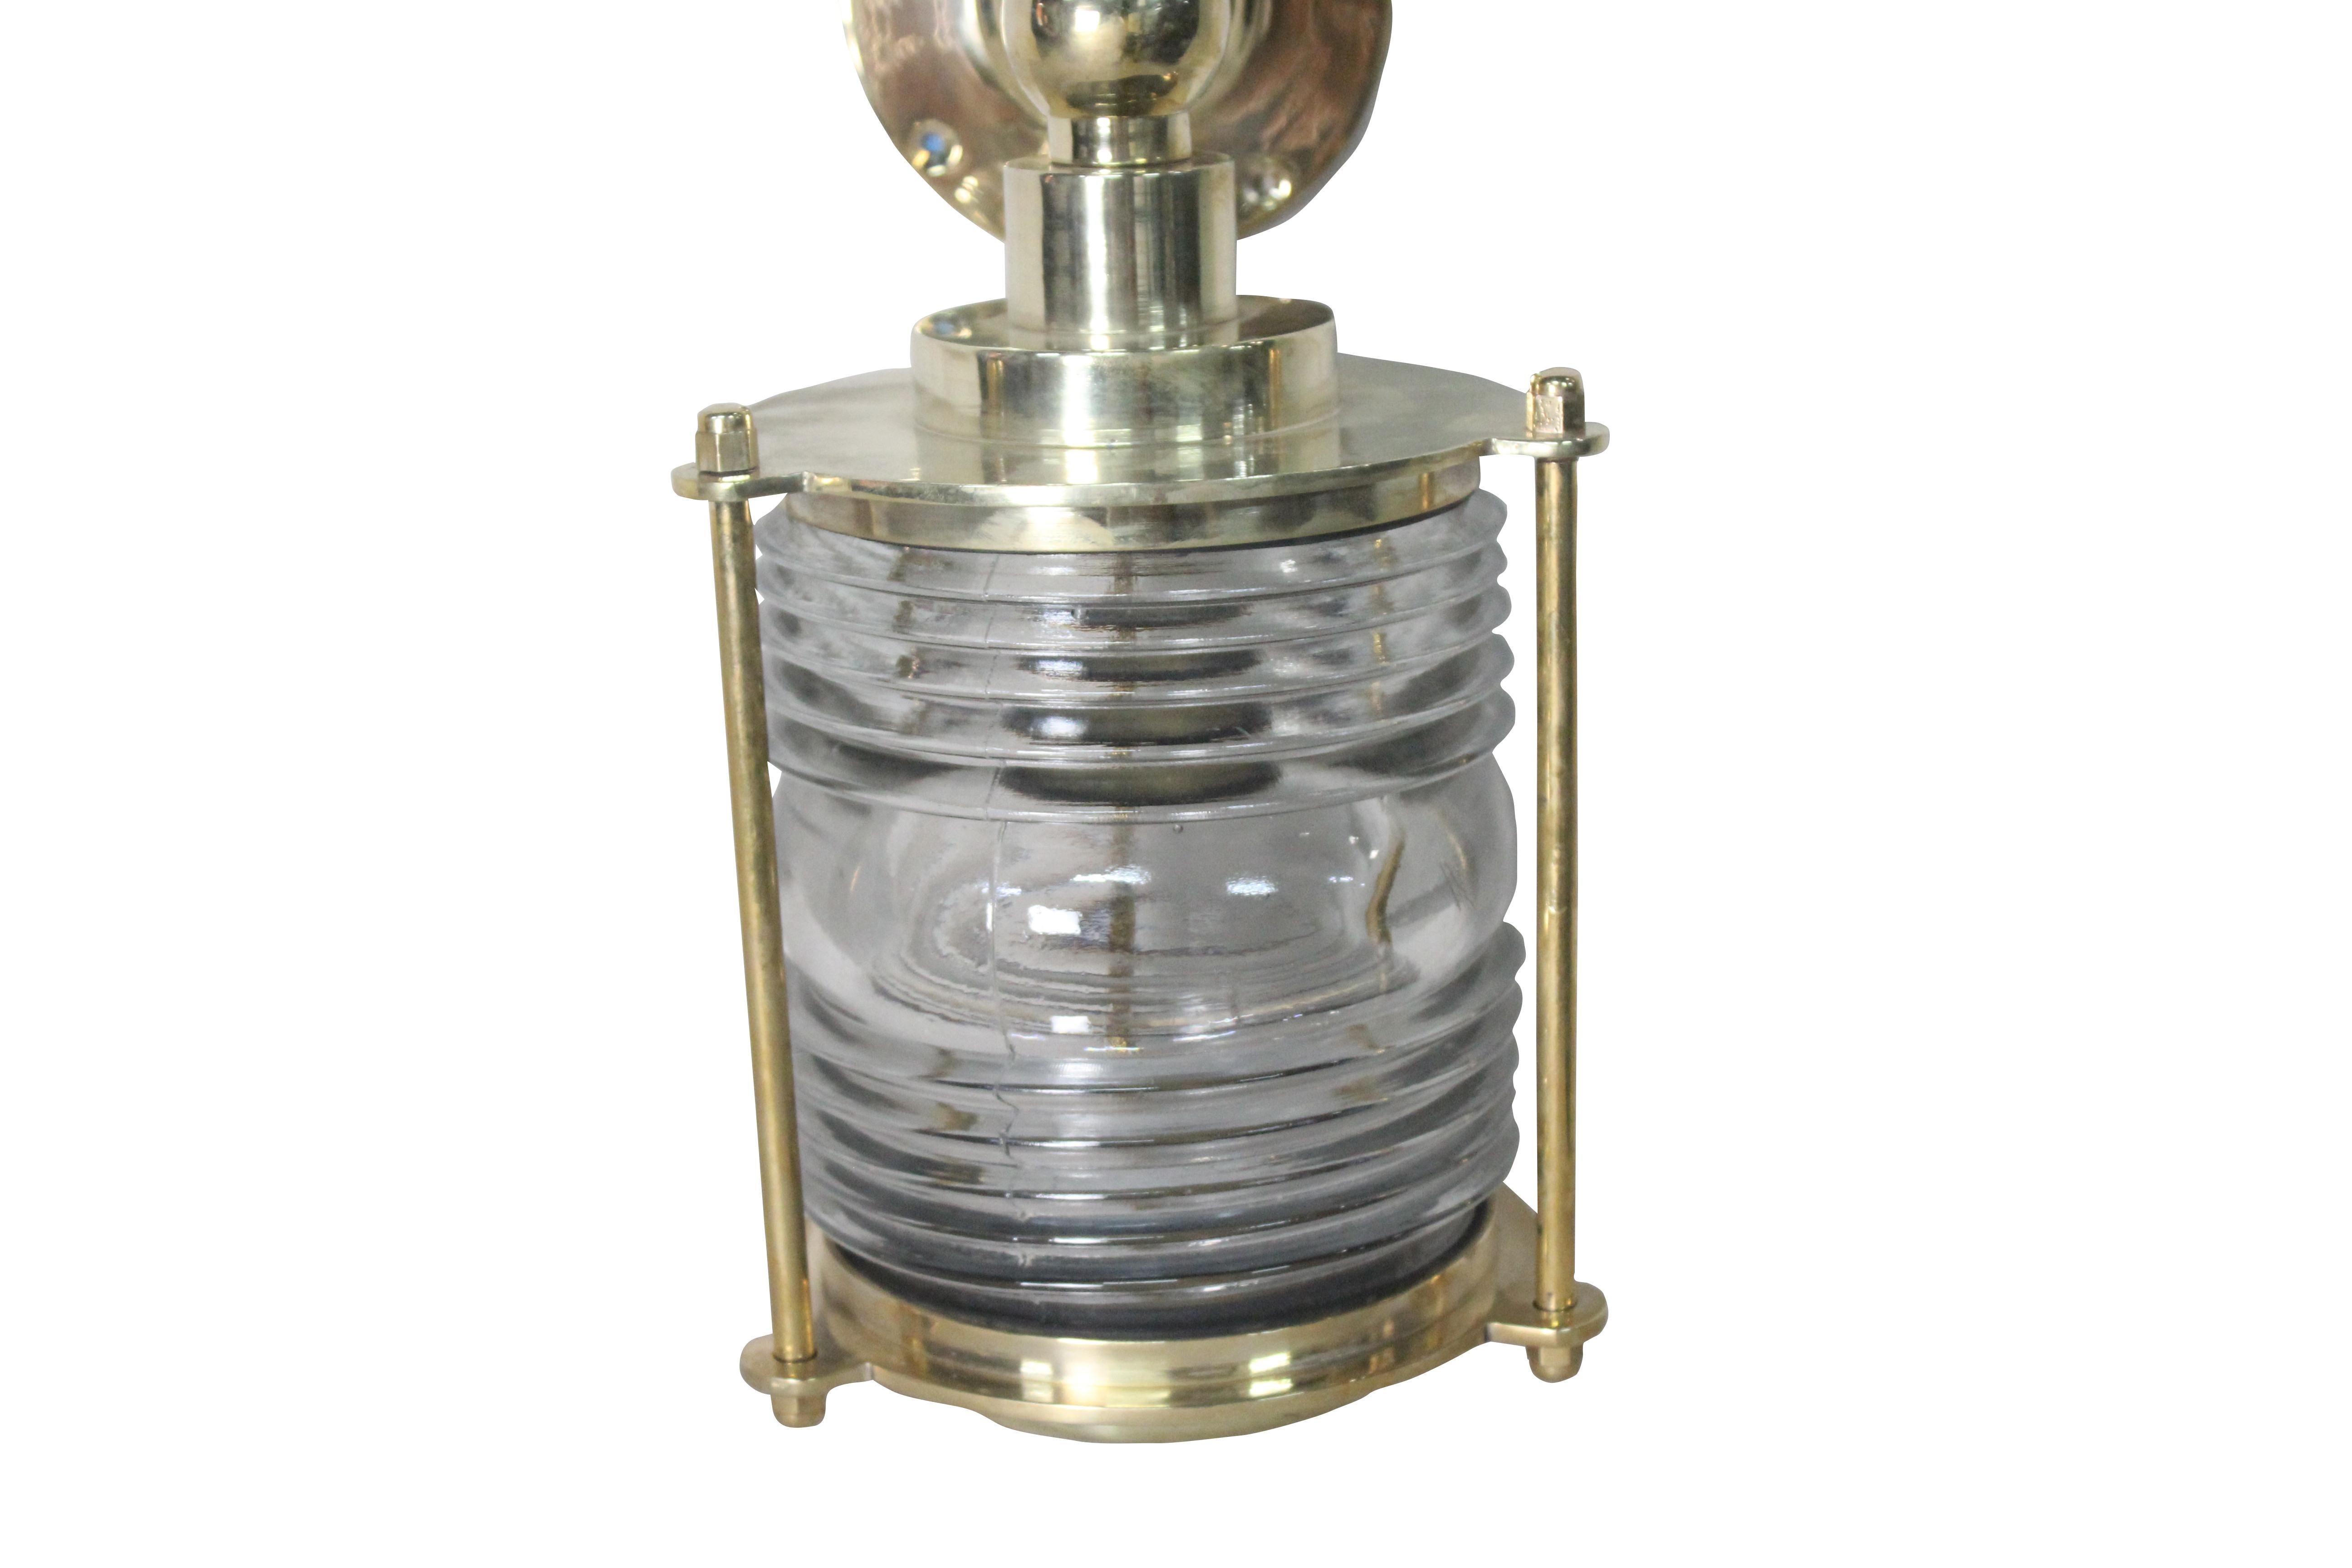 European Pair of Nautical Brass and Fresnel Lens Ship's Post Lights